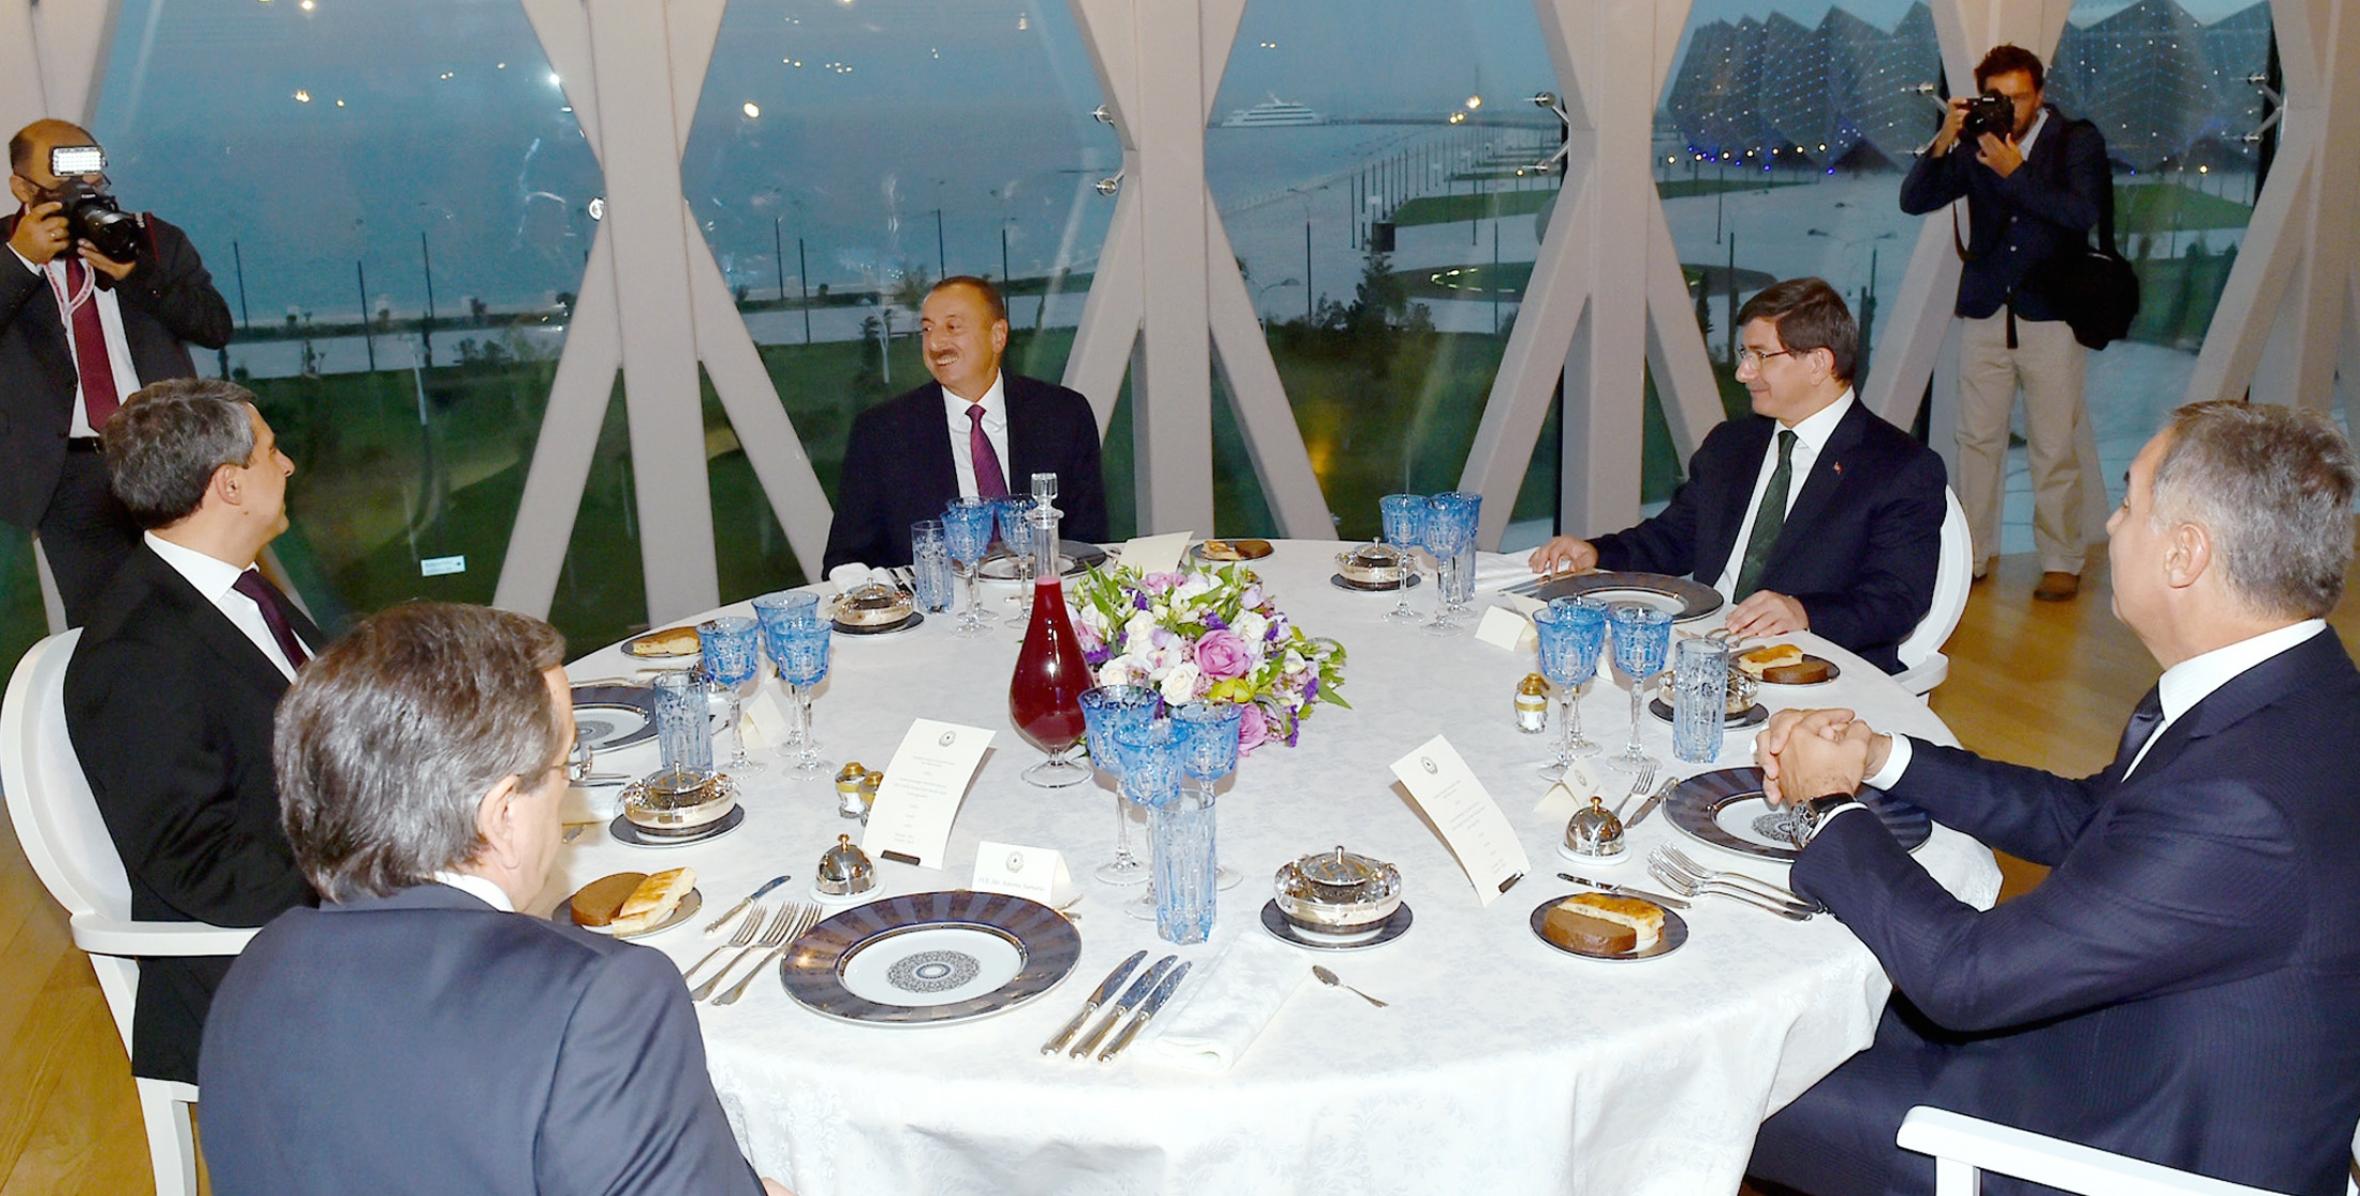 Dinner reception was hosted on behalf of President Ilham Aliyev in honor of the heads of state and government